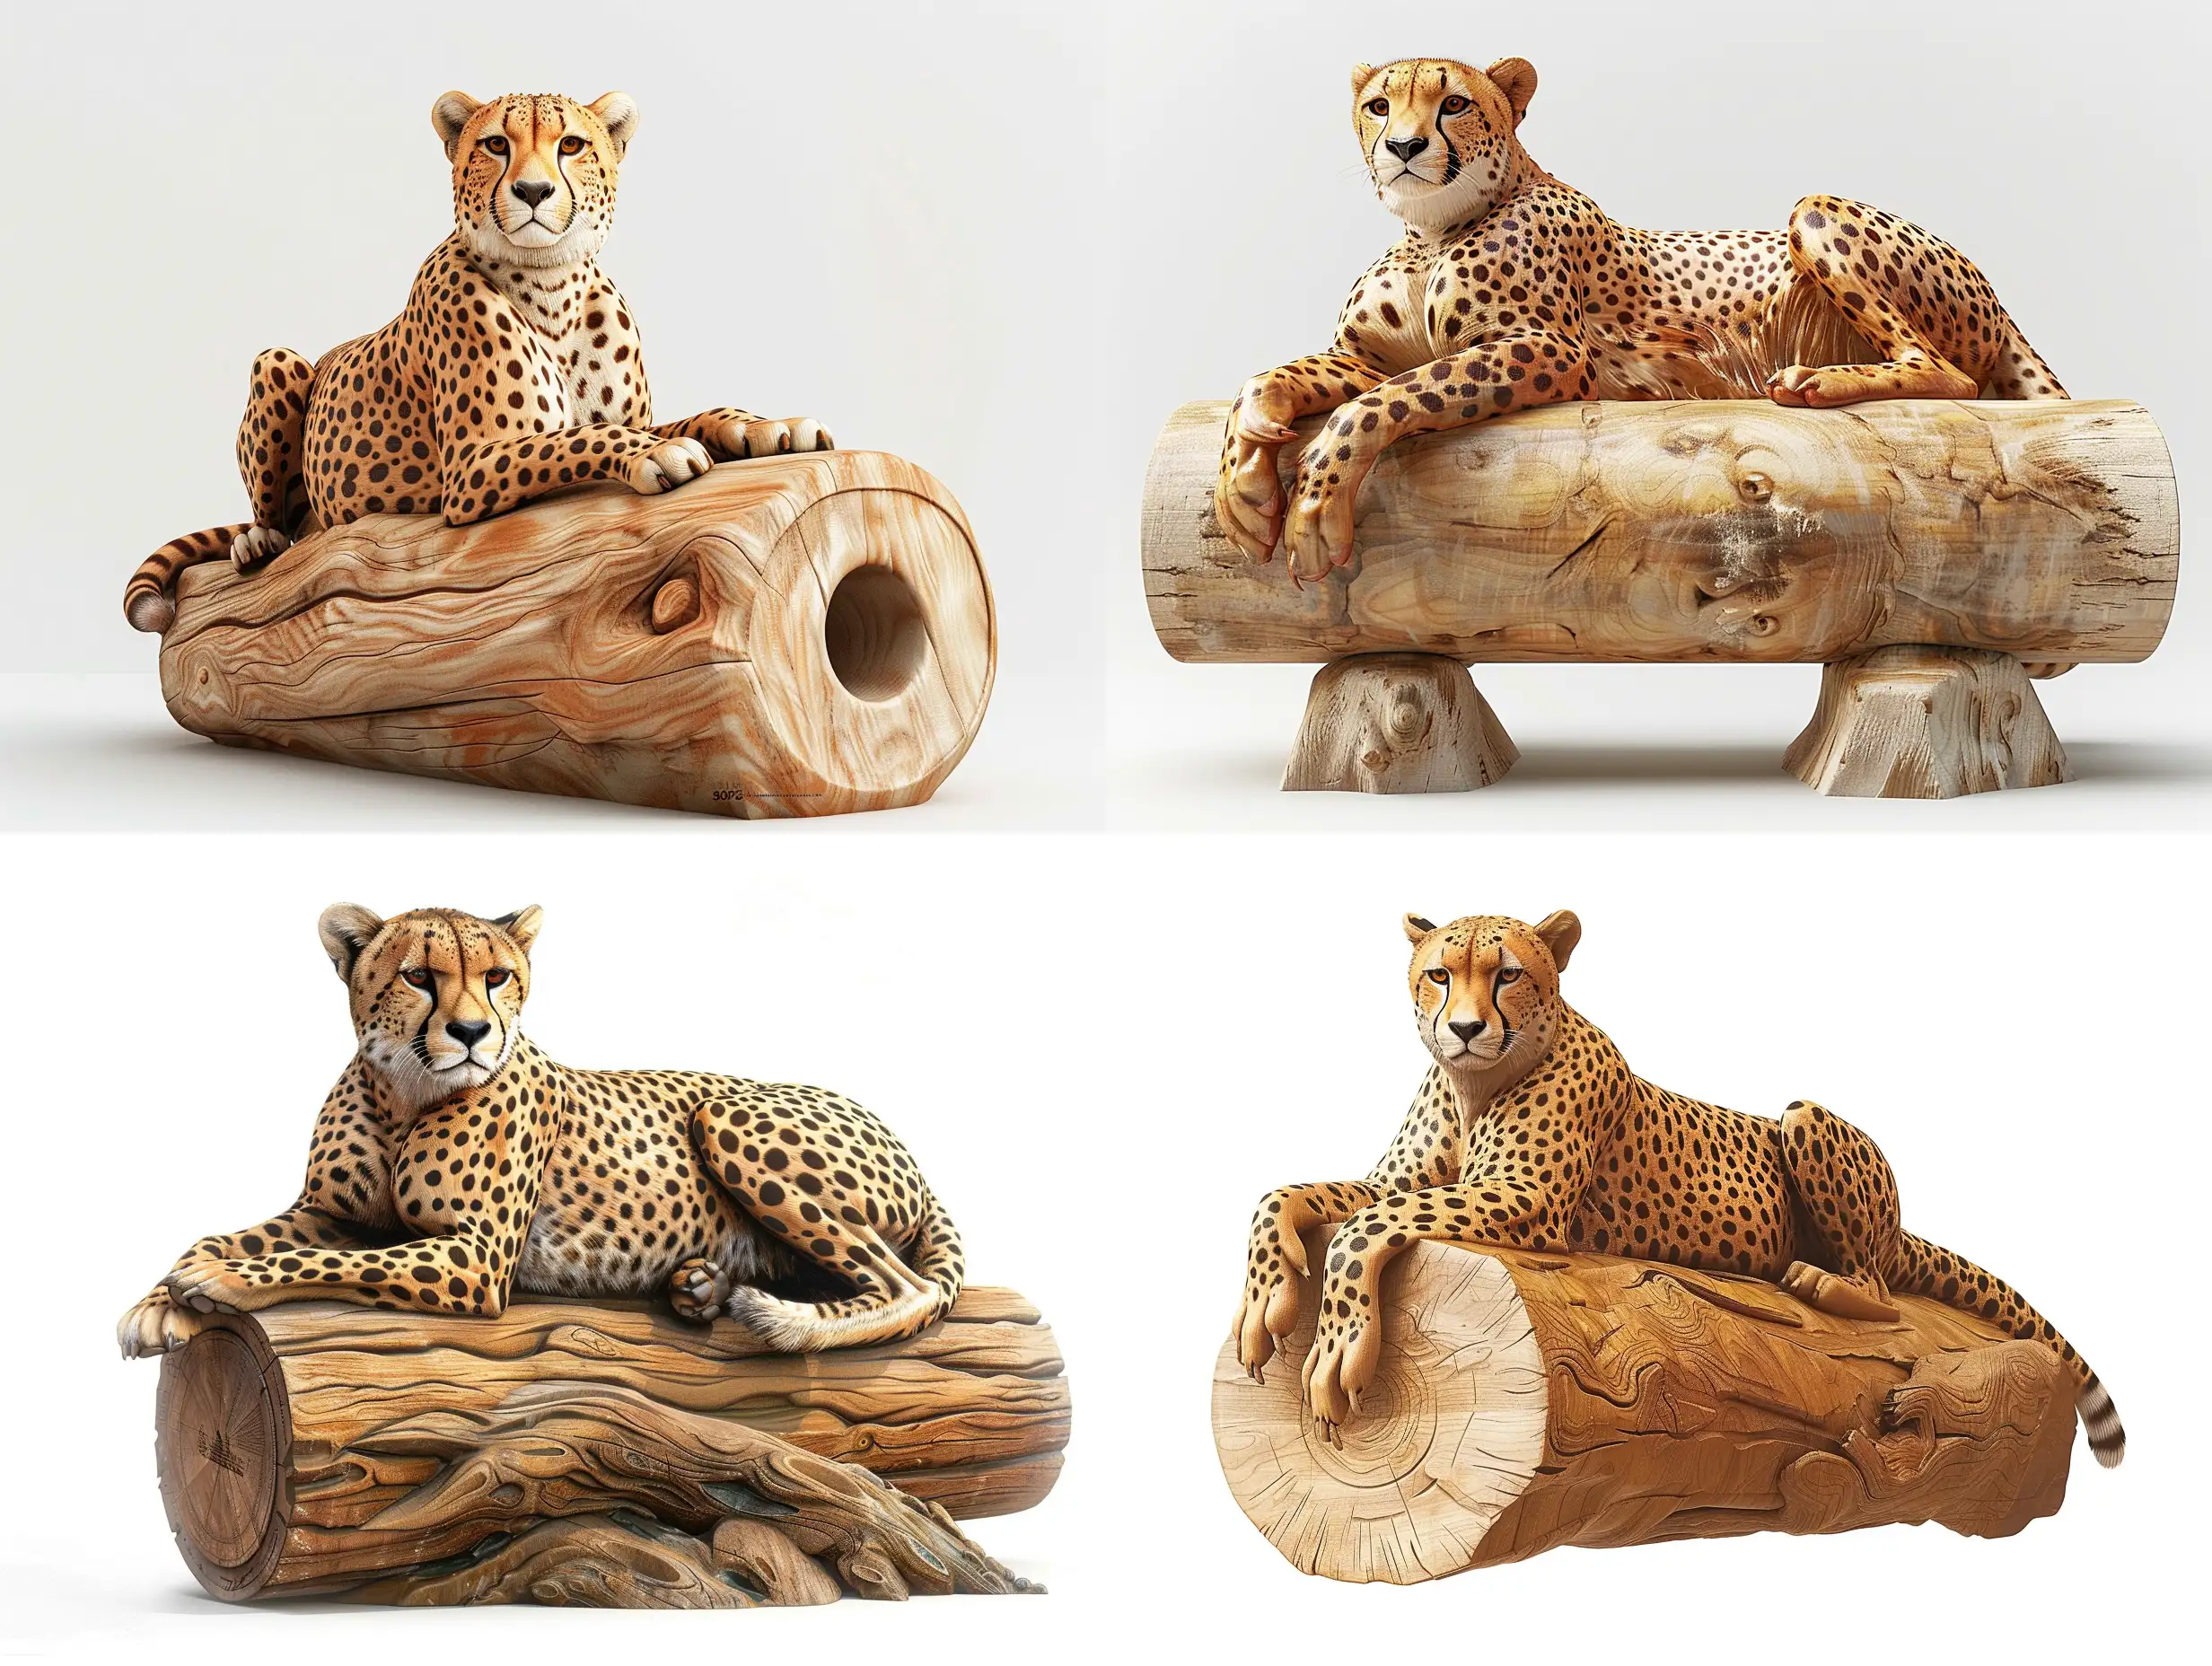 Realistic-Wooden-Cheetah-Sculpture-Resting-on-Cylinder-Professional-Wood-Carving-Art